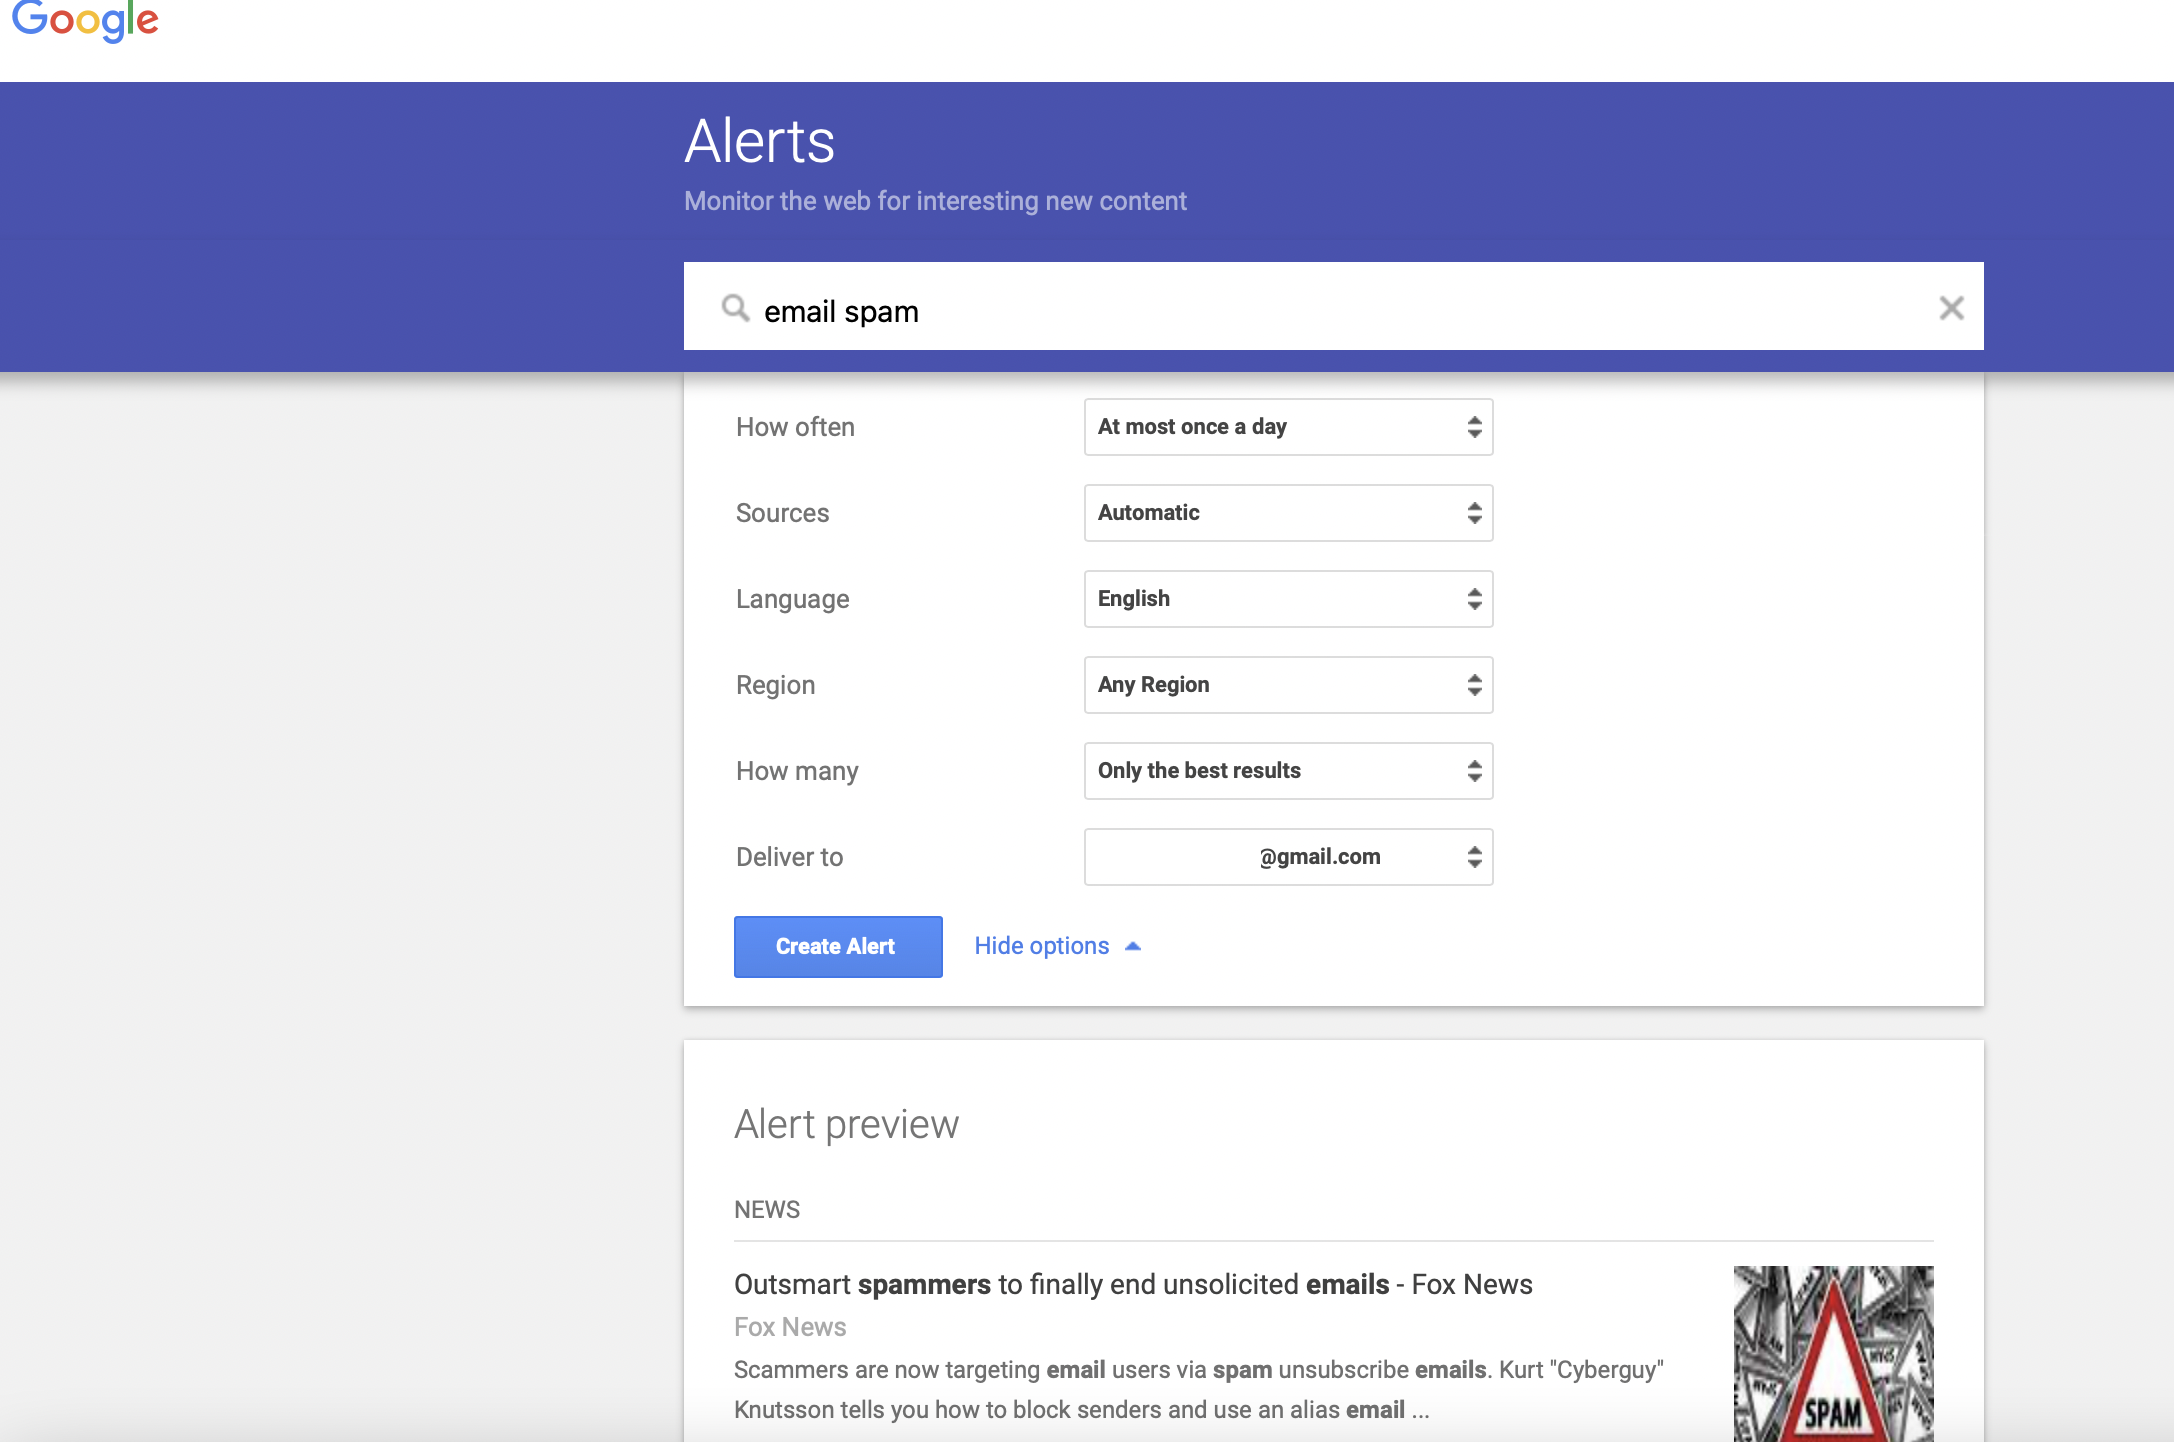 google alert setup page with different customization fields and an alert set up for email spam